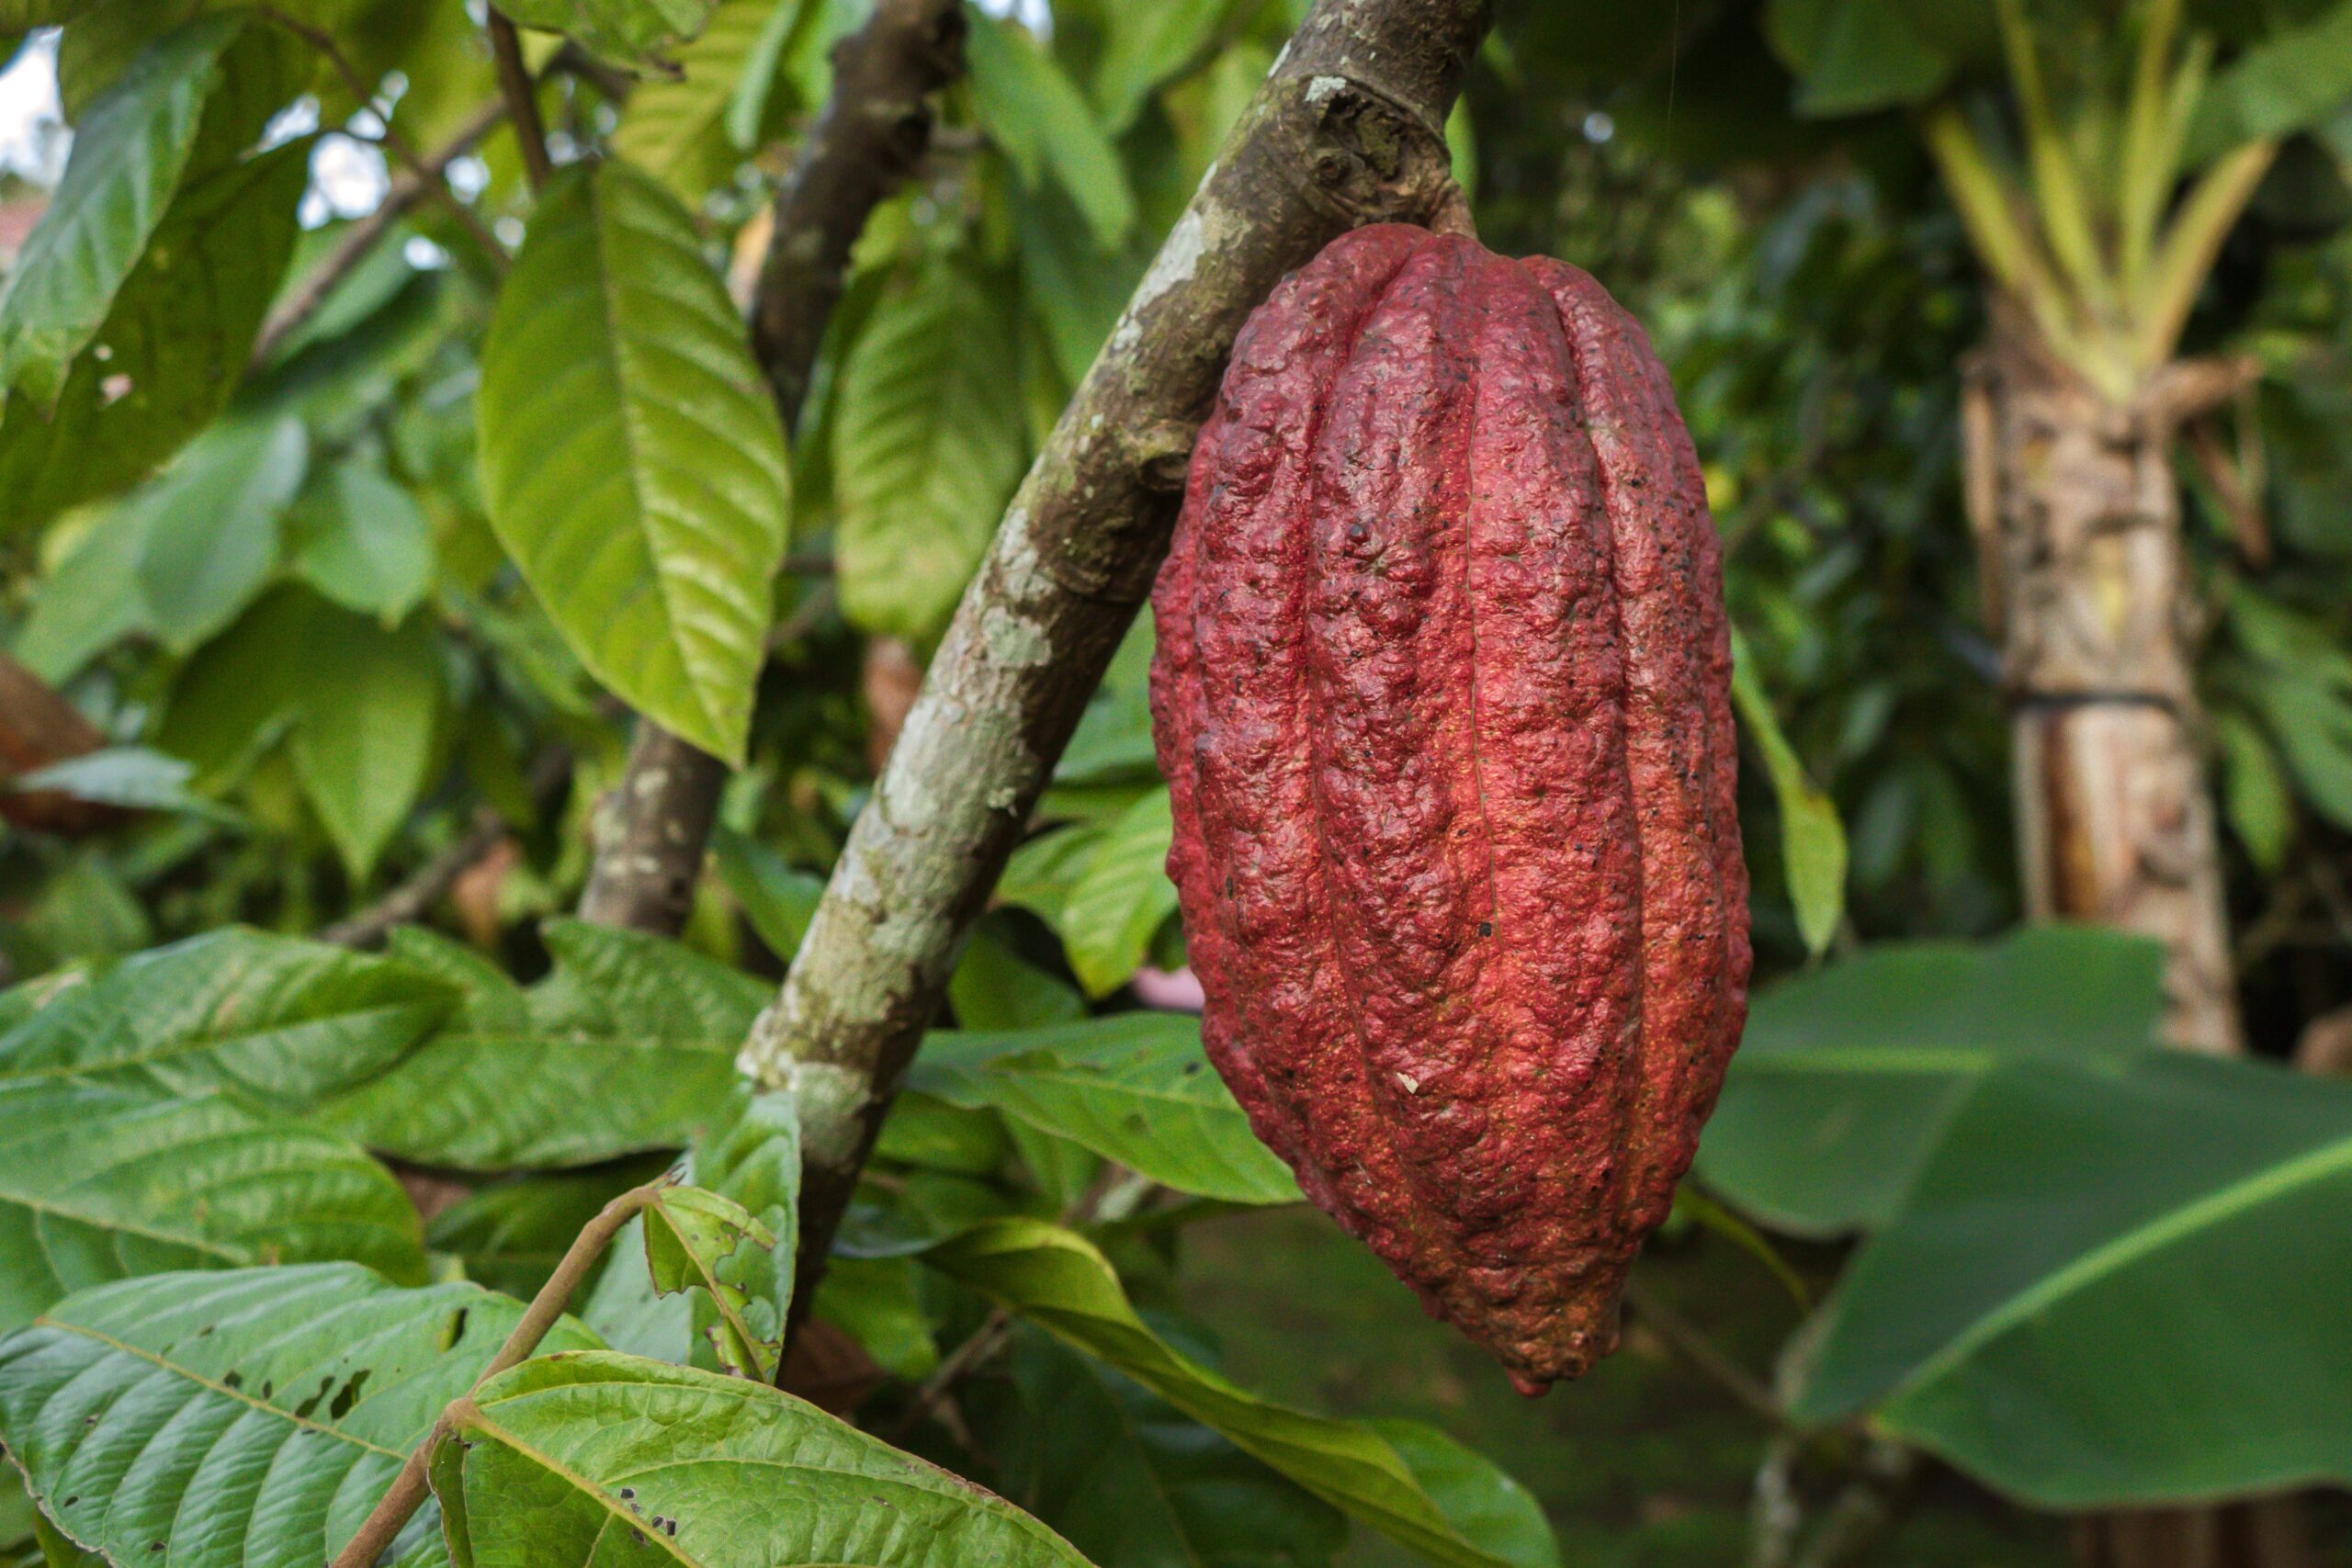 Red cocoa pod on tree trunk